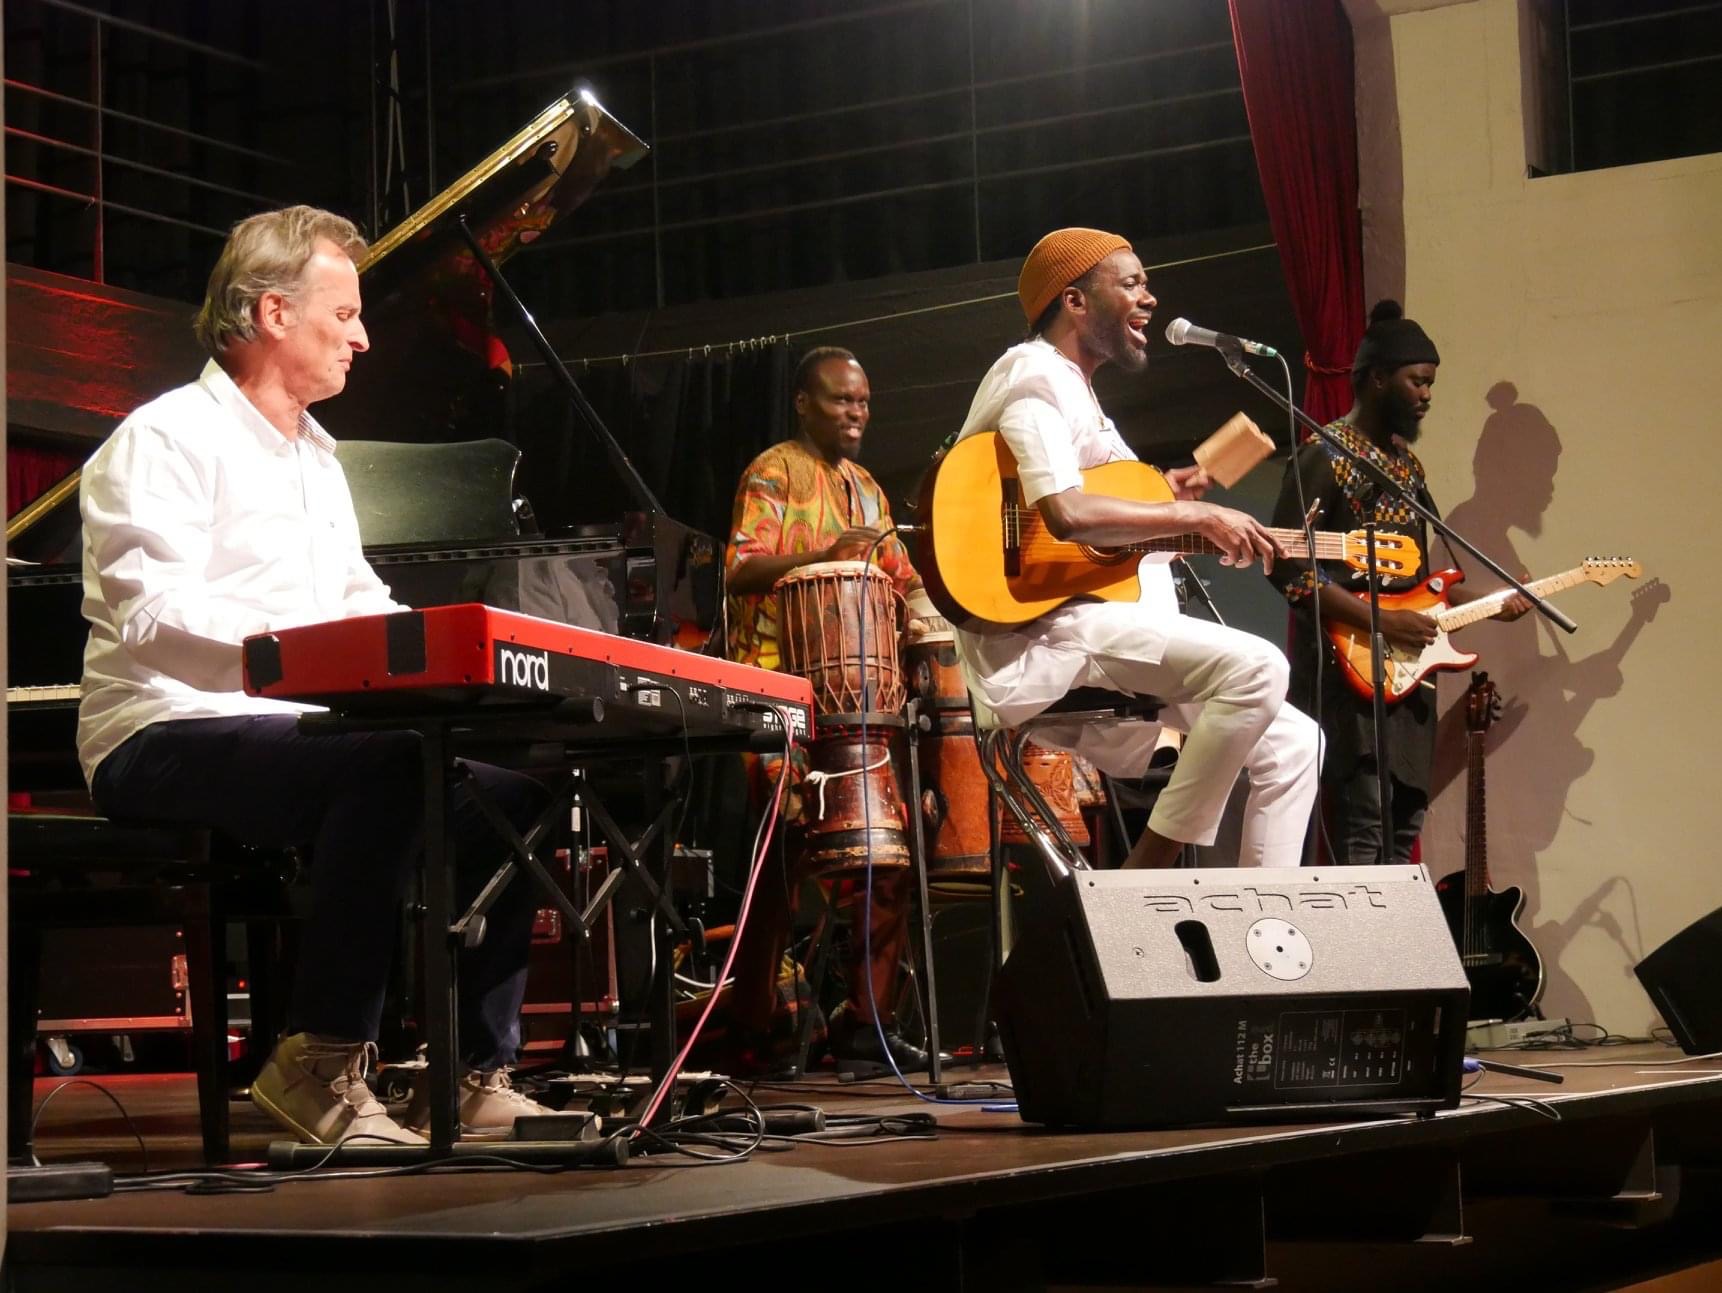 GlobalMusicOrchestra – The Westafrican Project